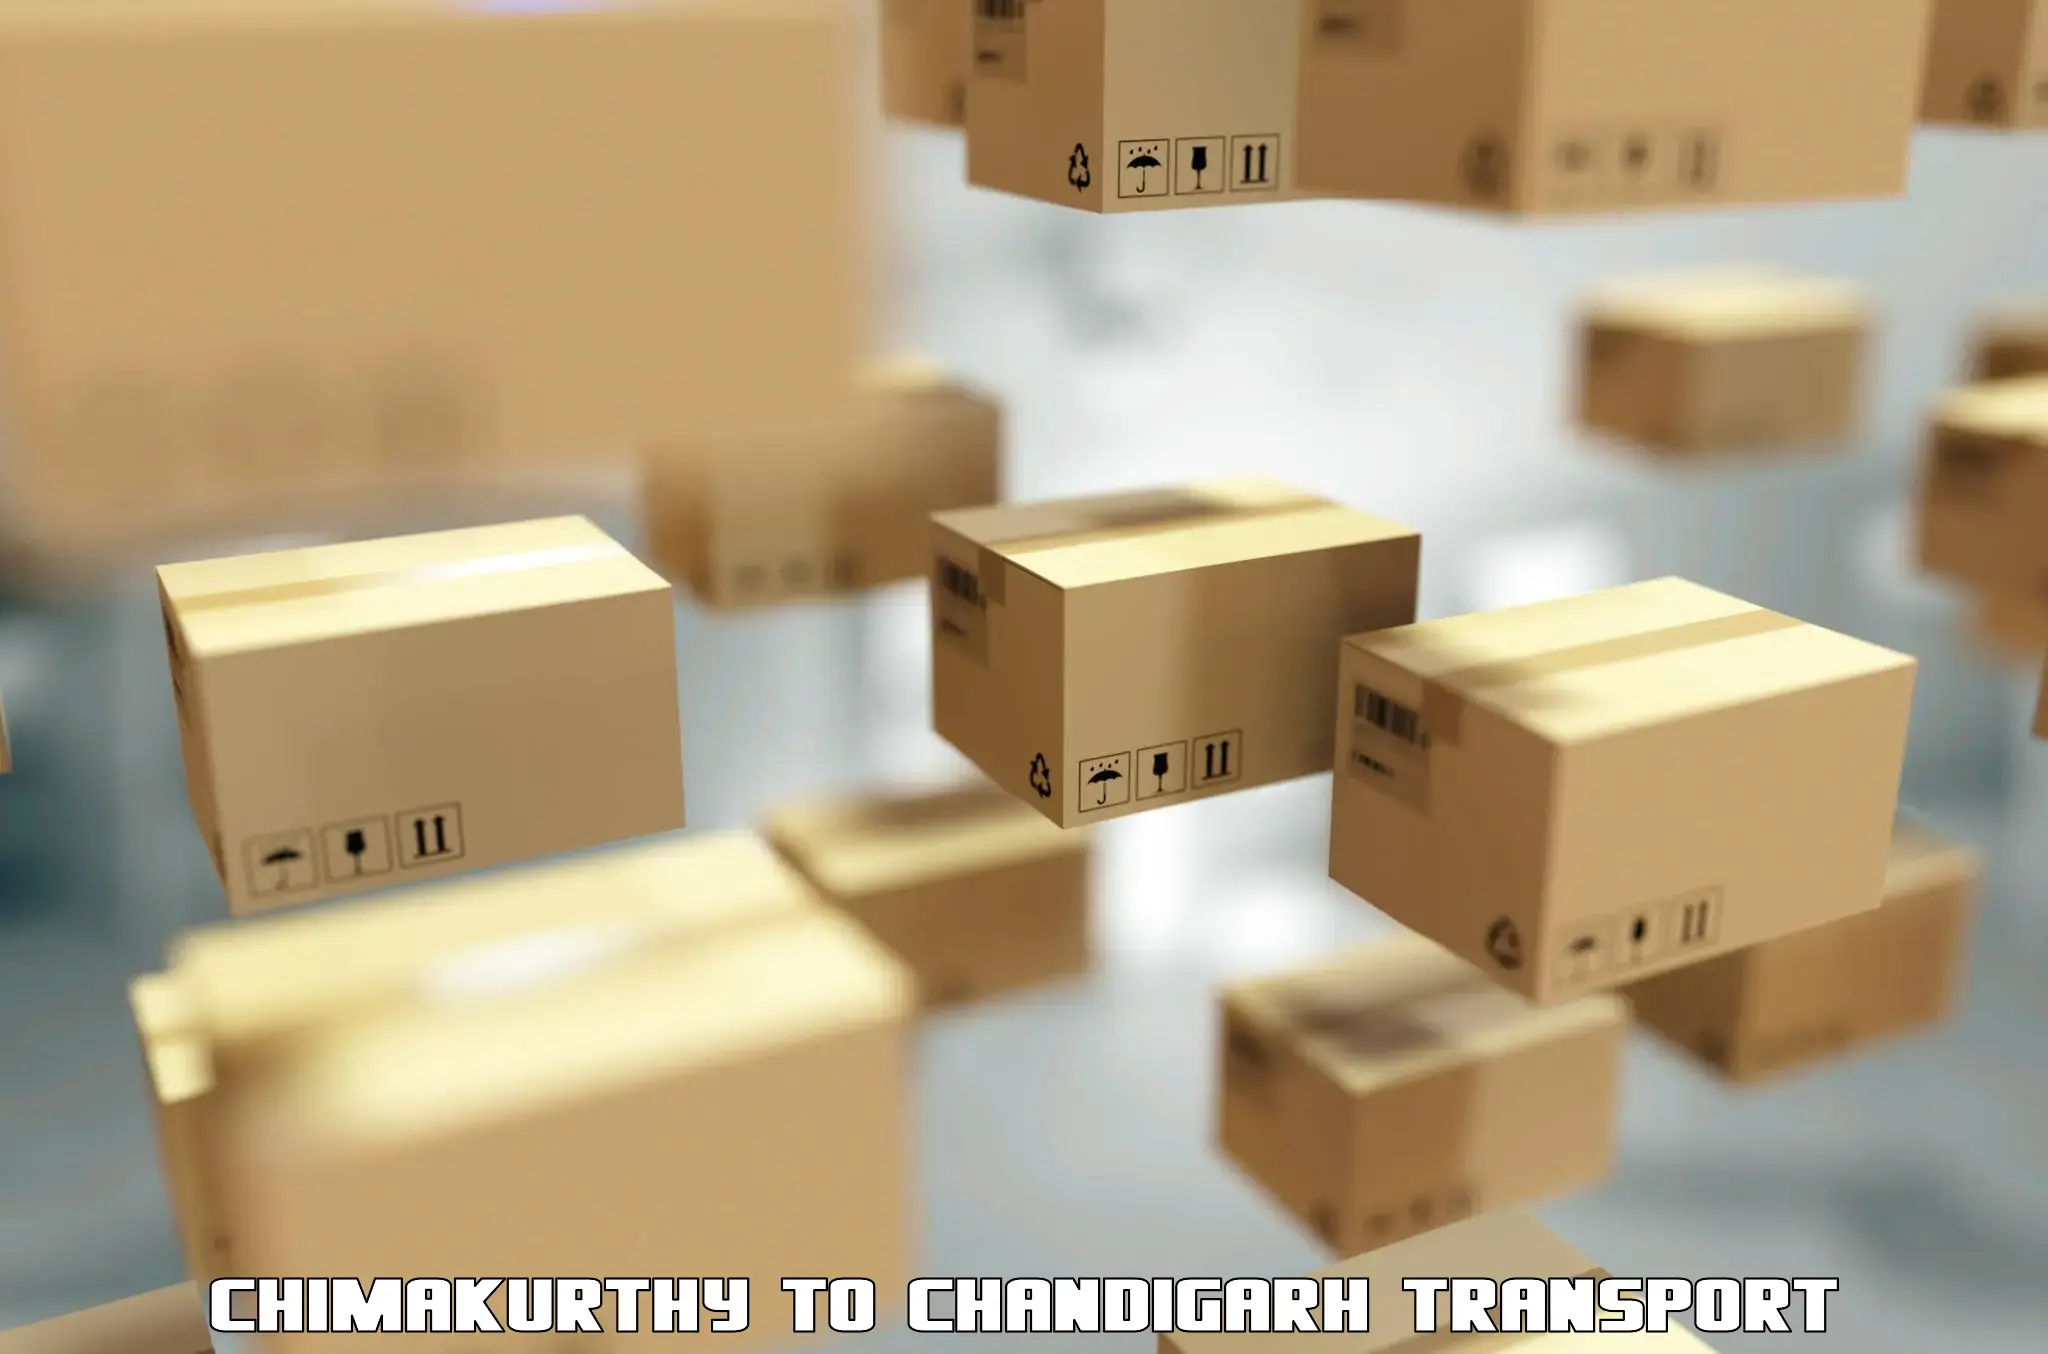 Express transport services Chimakurthy to Chandigarh